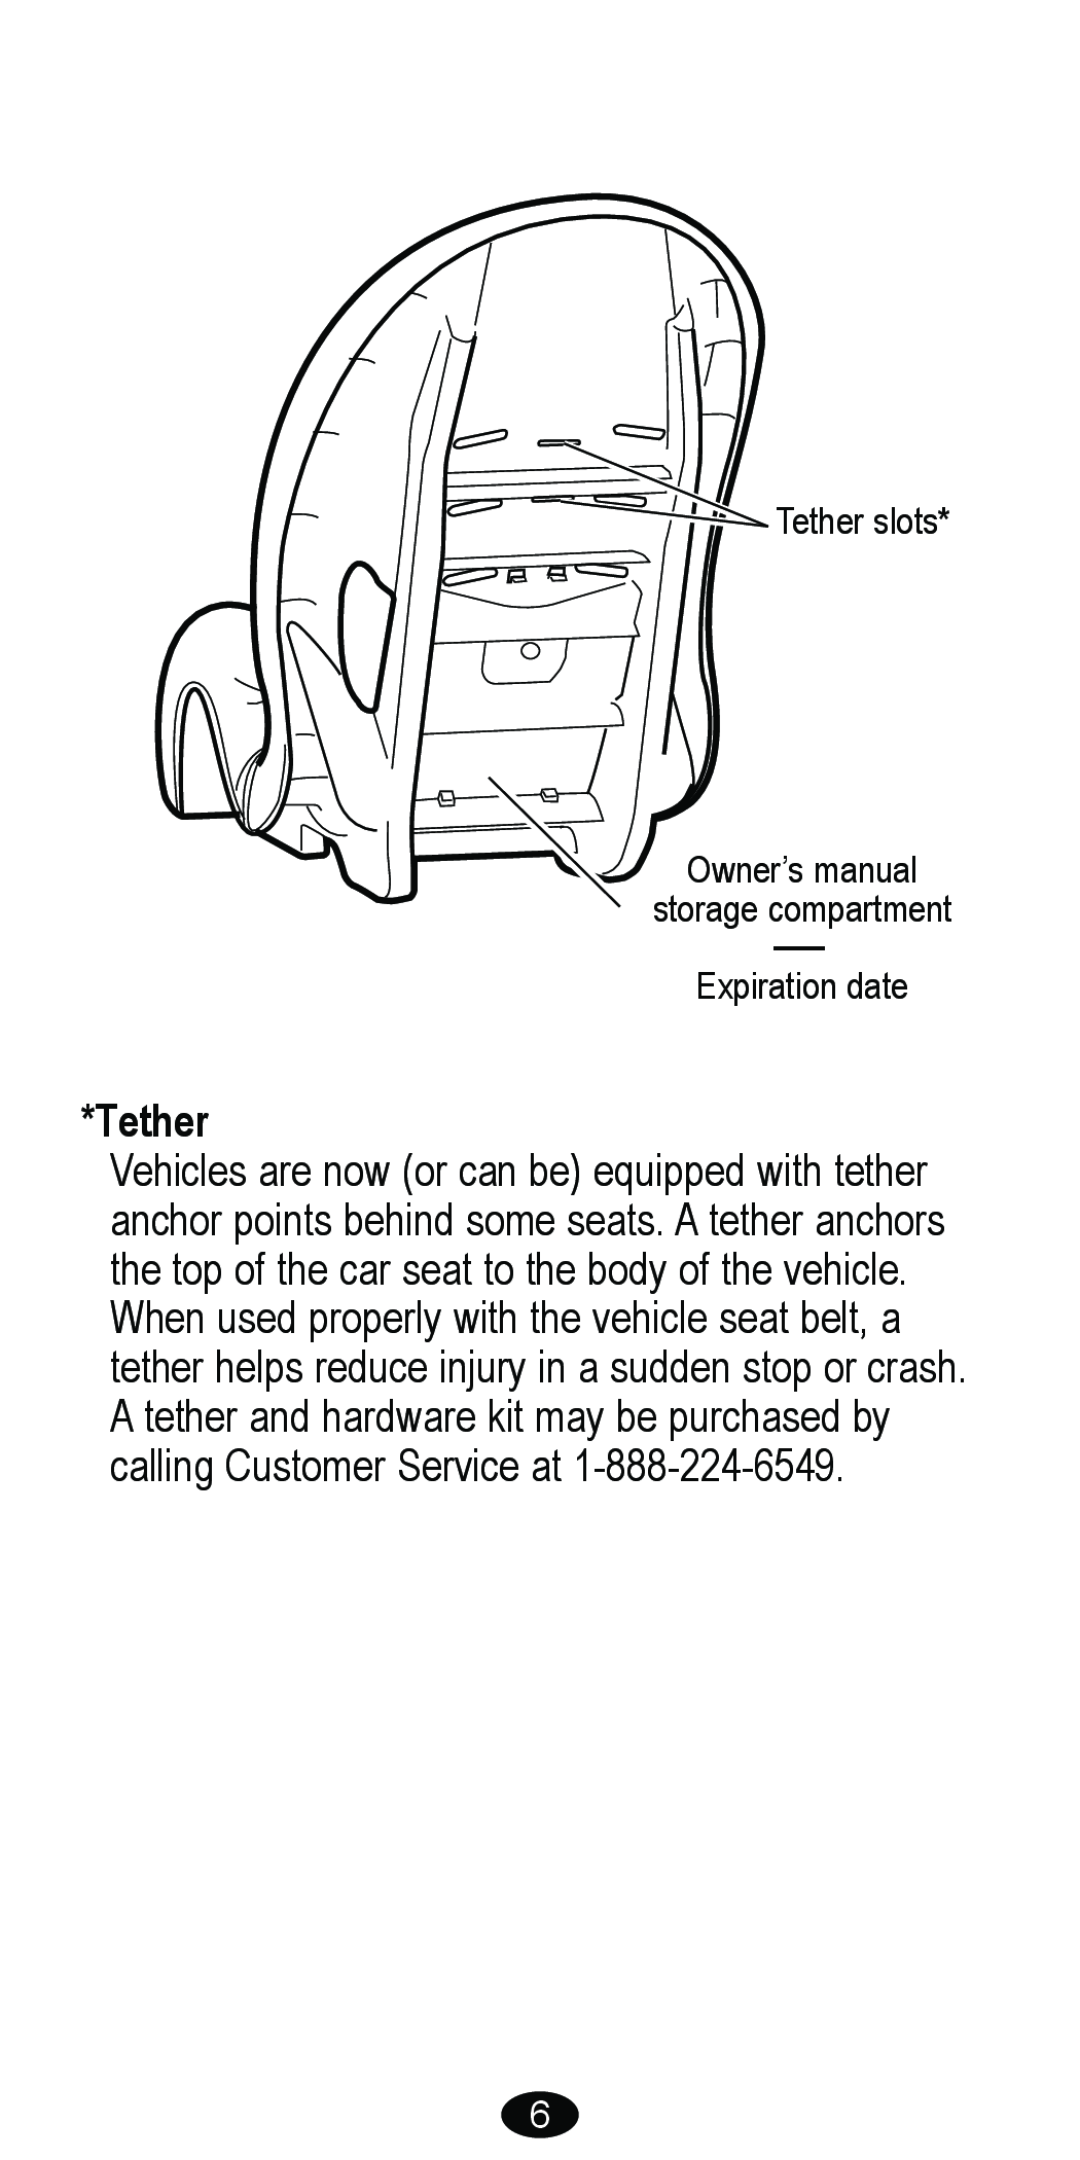 Graco 8481 owner manual Tether slots Owner’s manual storage compartment, Expiration date 